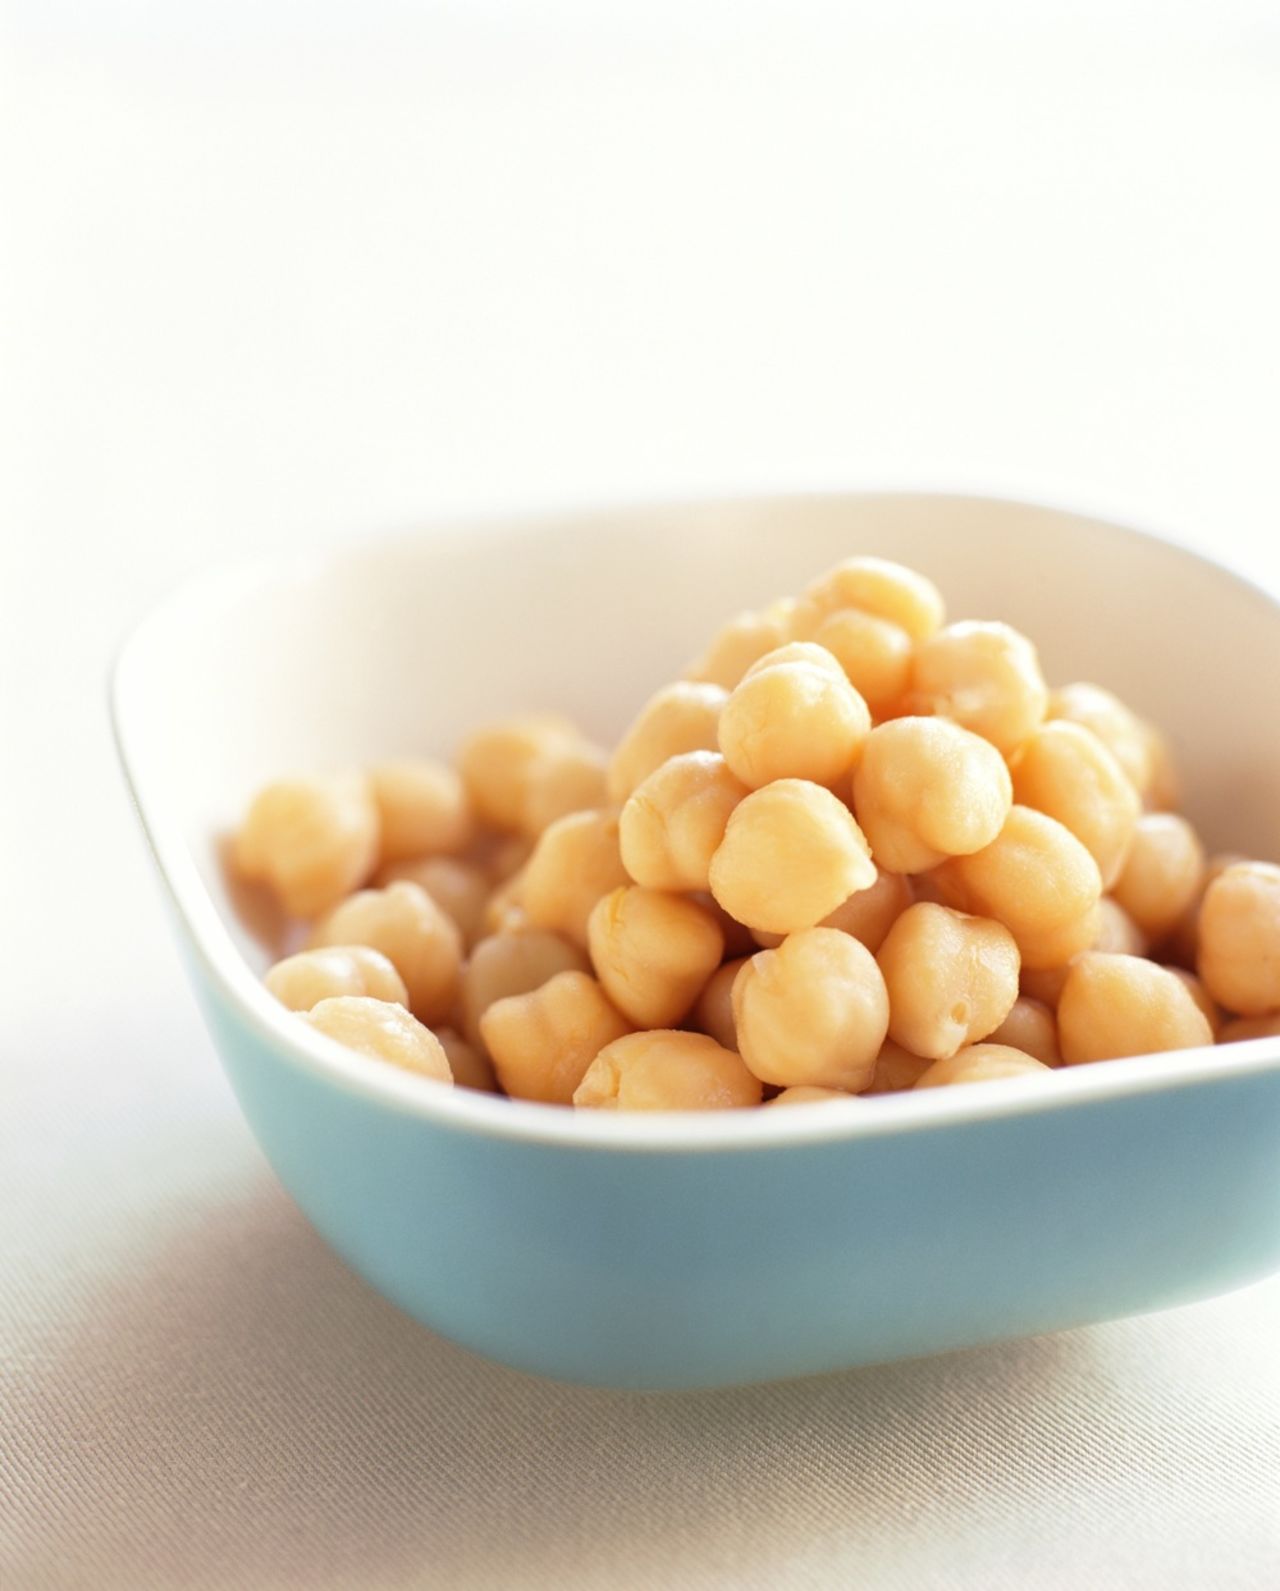 Beans have plenty of starch and fiber, requiring the body to work extra hard to process them.